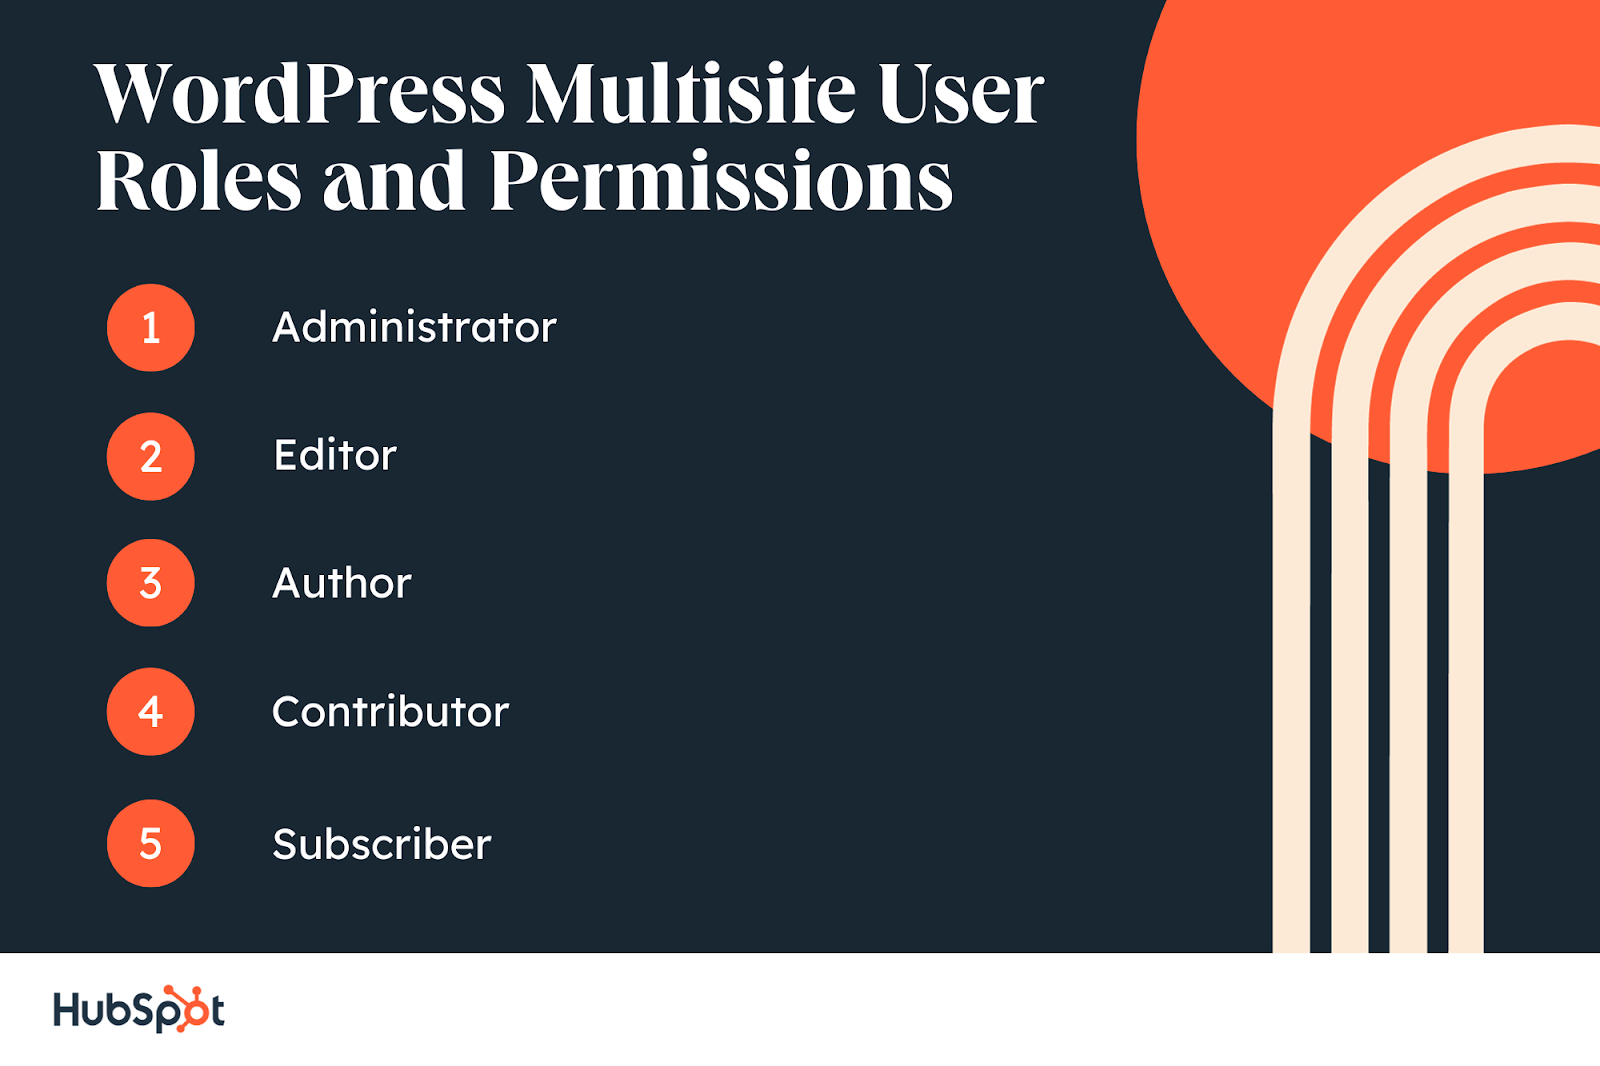 WordPress multisite user roles and permissions